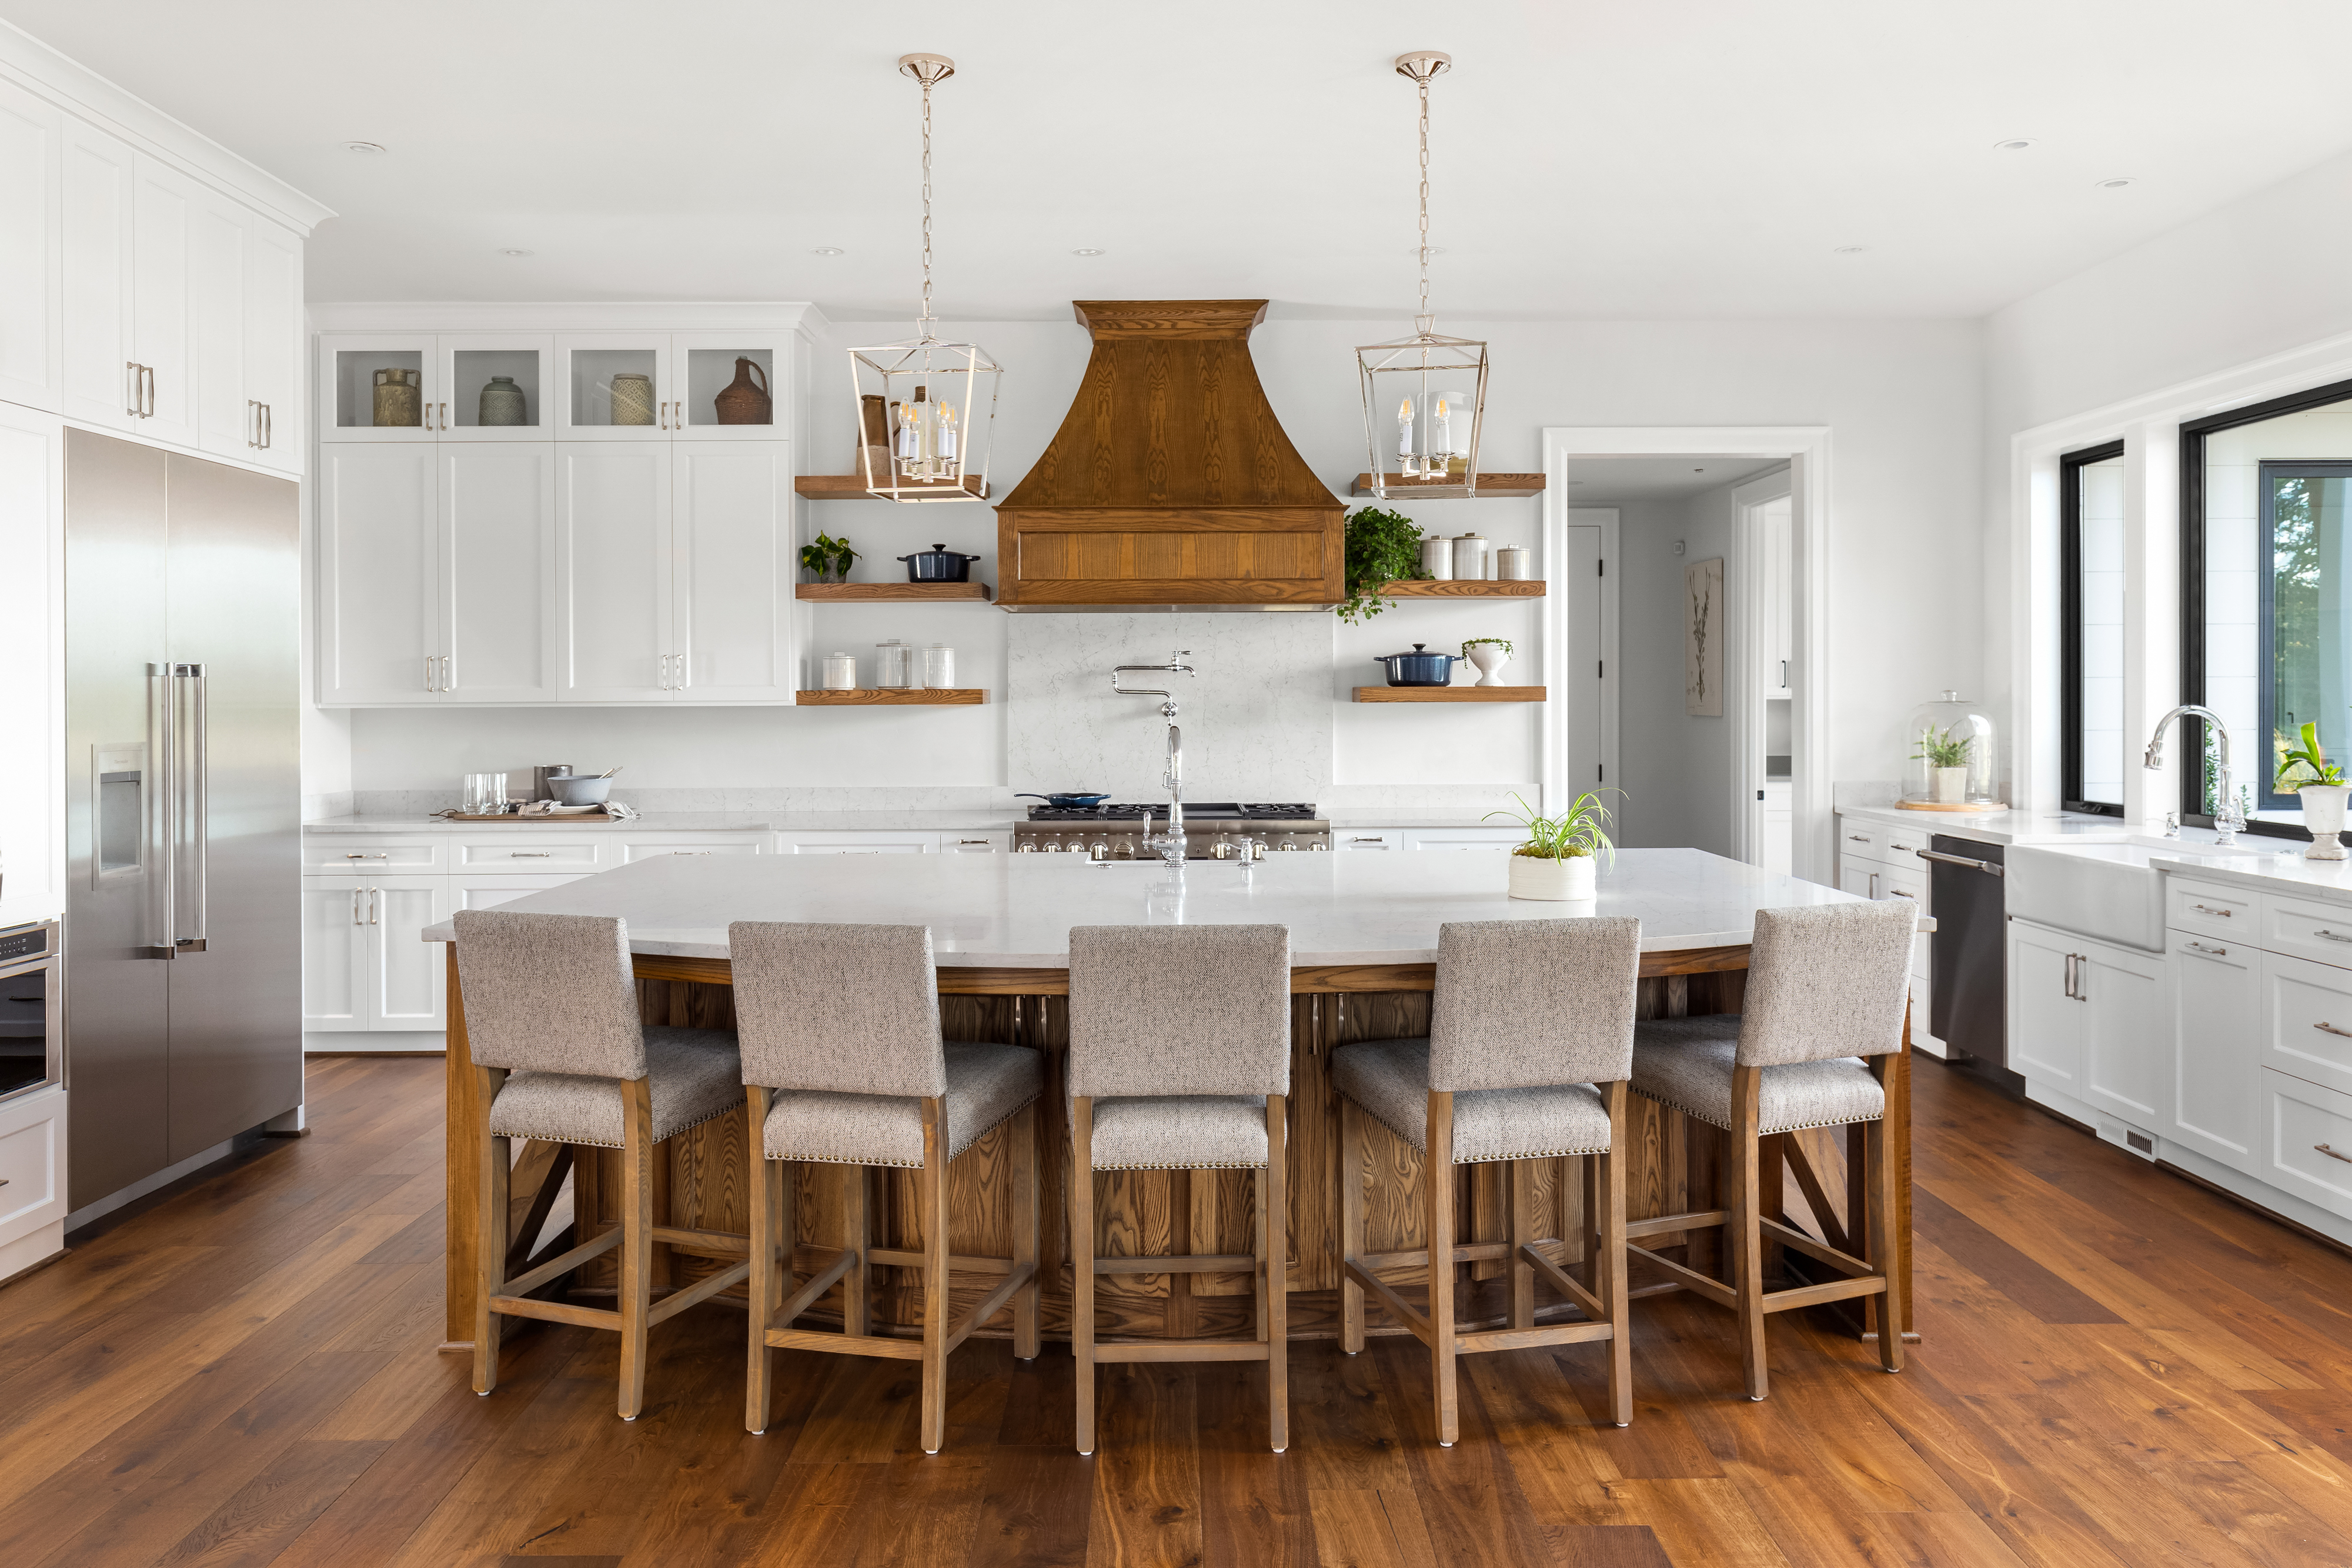 large kitchen island in modern kitchen with bar stools for eating